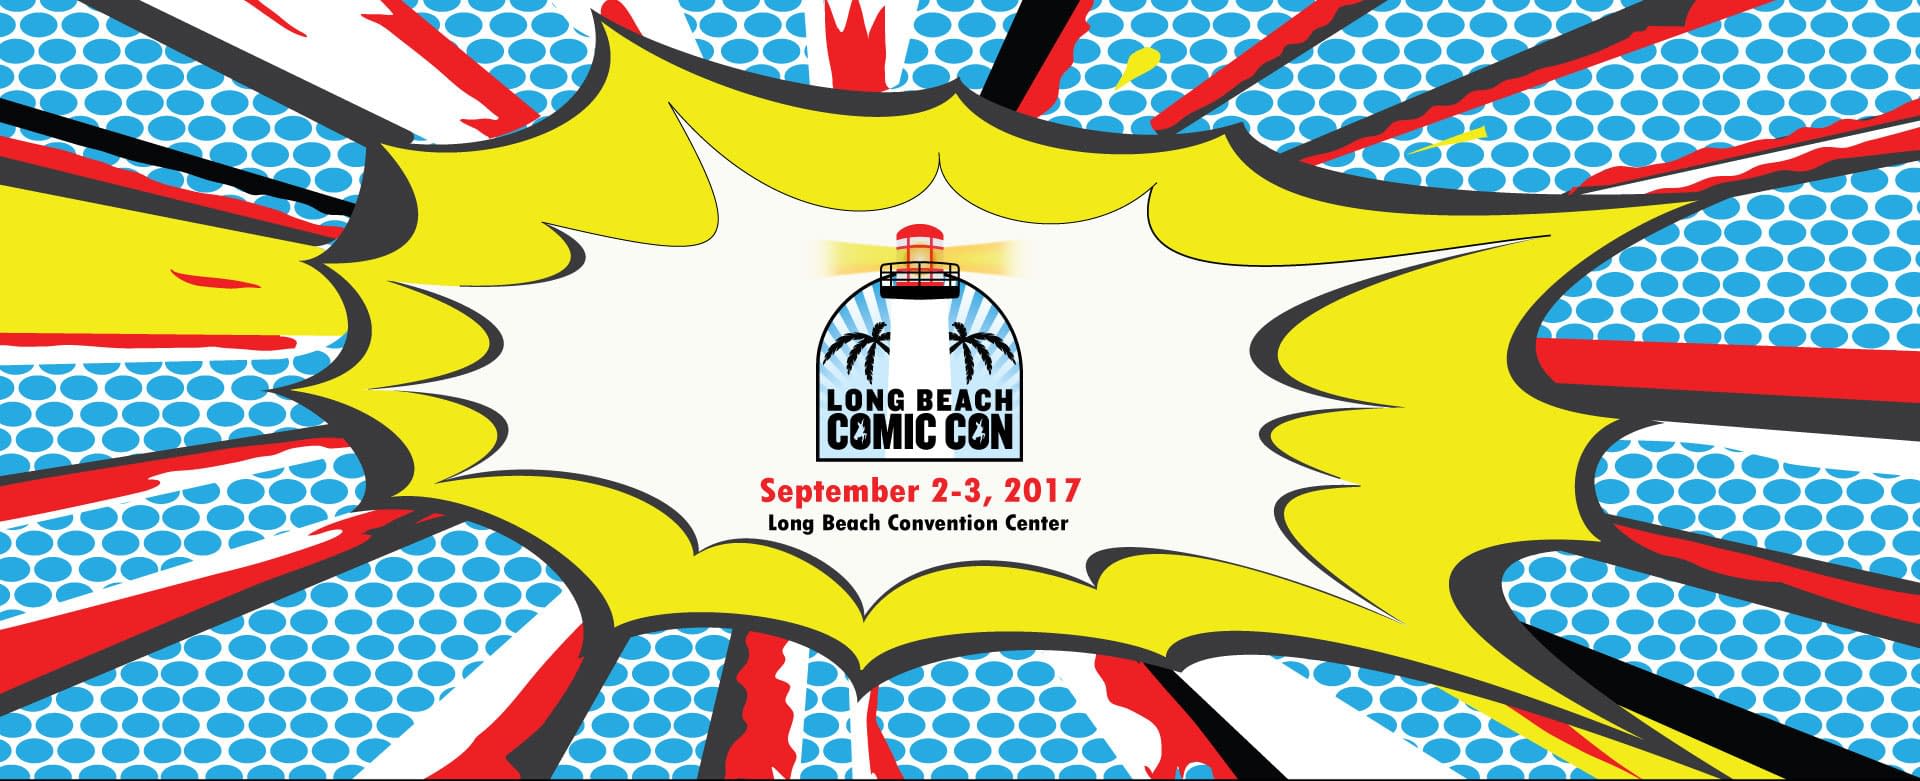 Exclusive! The Long Beach Comic Con 2017 Panels And Programming Schedule